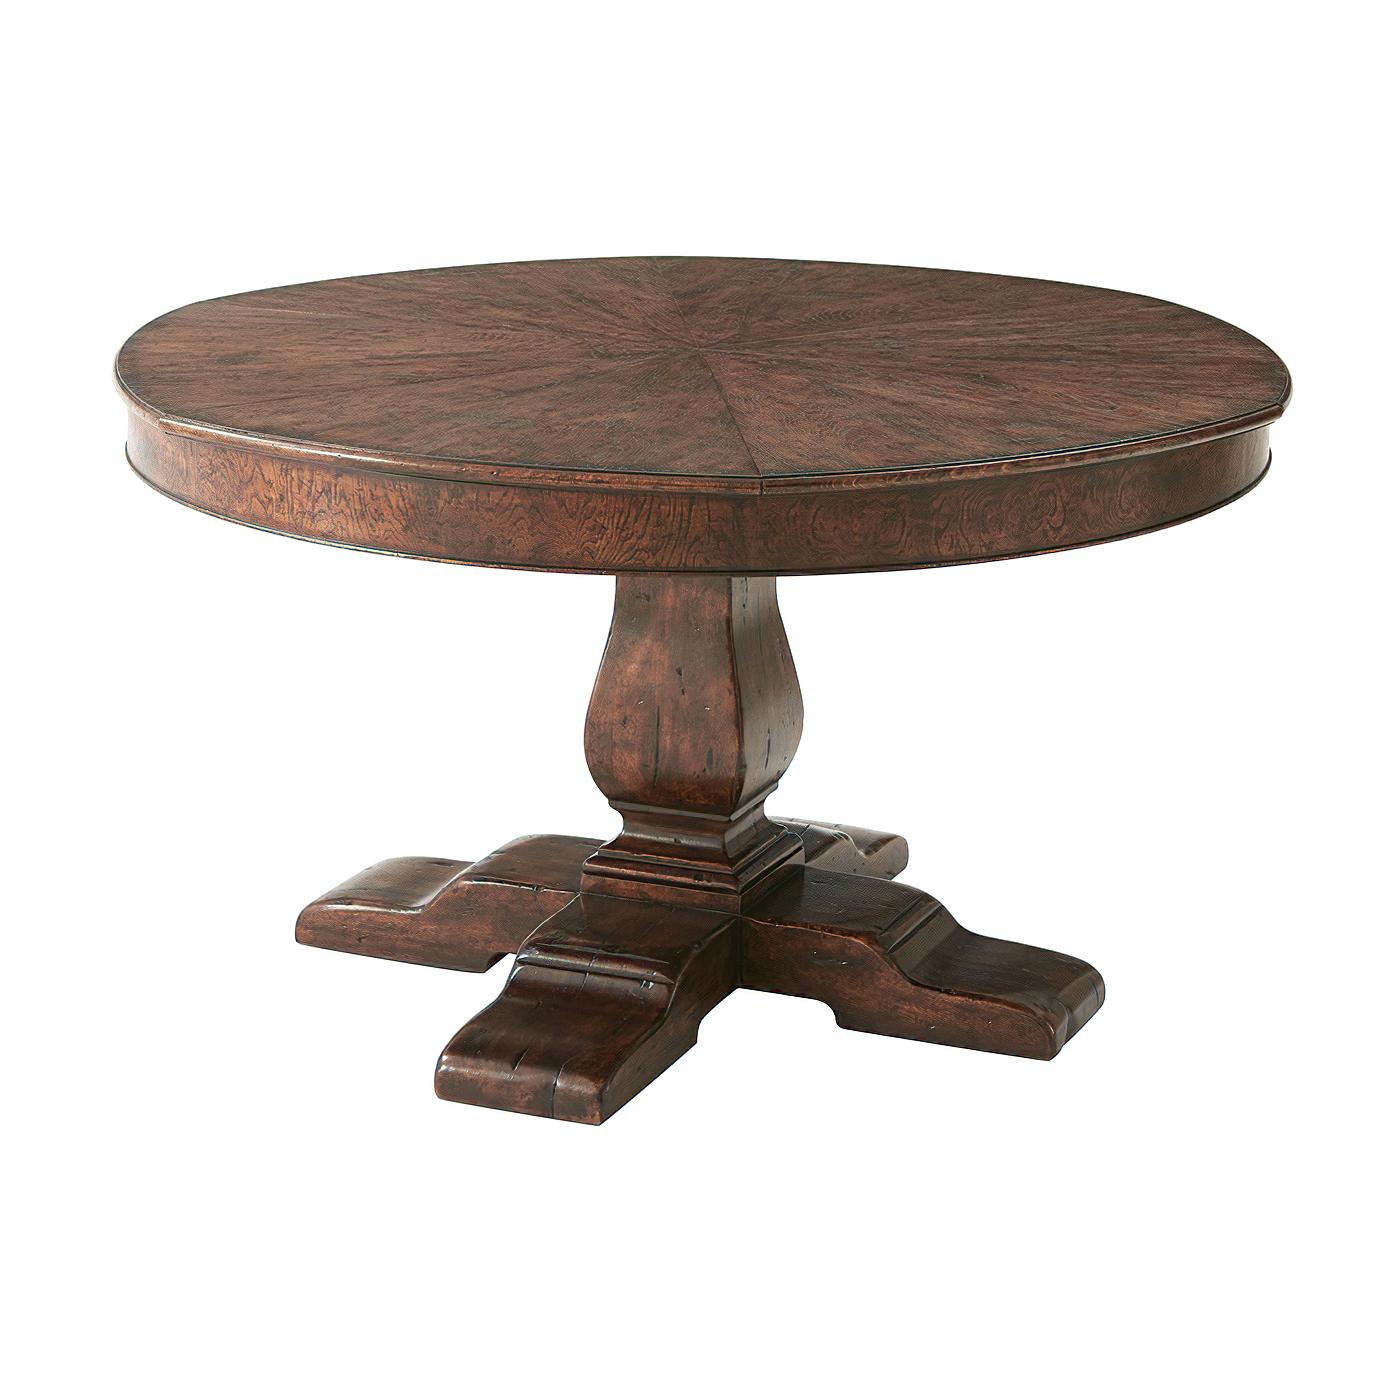 A reclaimed oak and chestnut burl restored circular extending dining table, the segmented top opening to reveal six self-storing fold-out leaves above a plain frieze, on a vase column support and crossover refectory feet.

Open Dimensions: 72